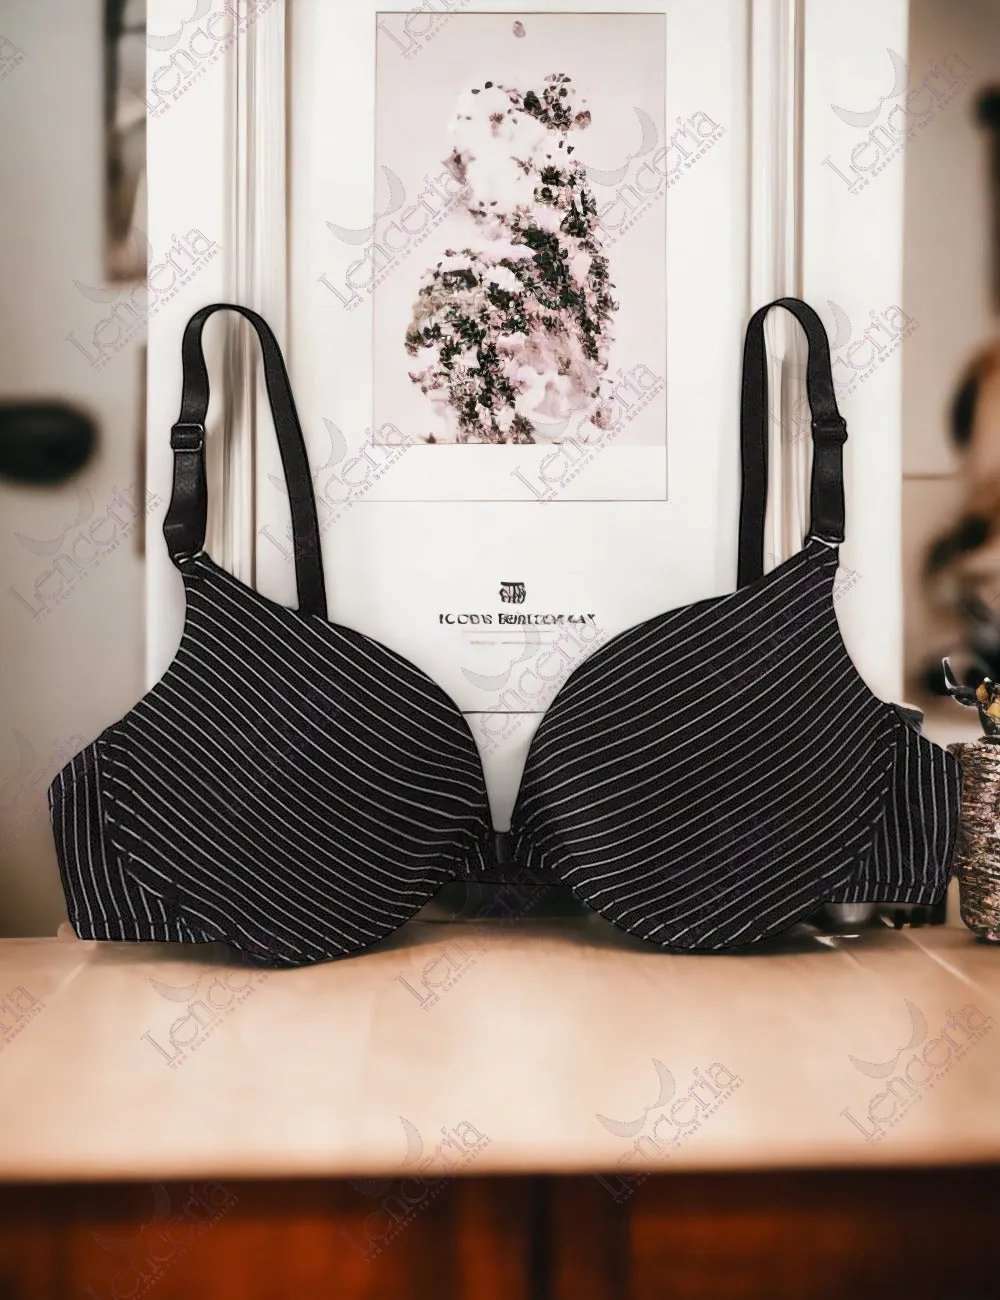 Cheriee everyday essentials lightly padded bra - extremely cute